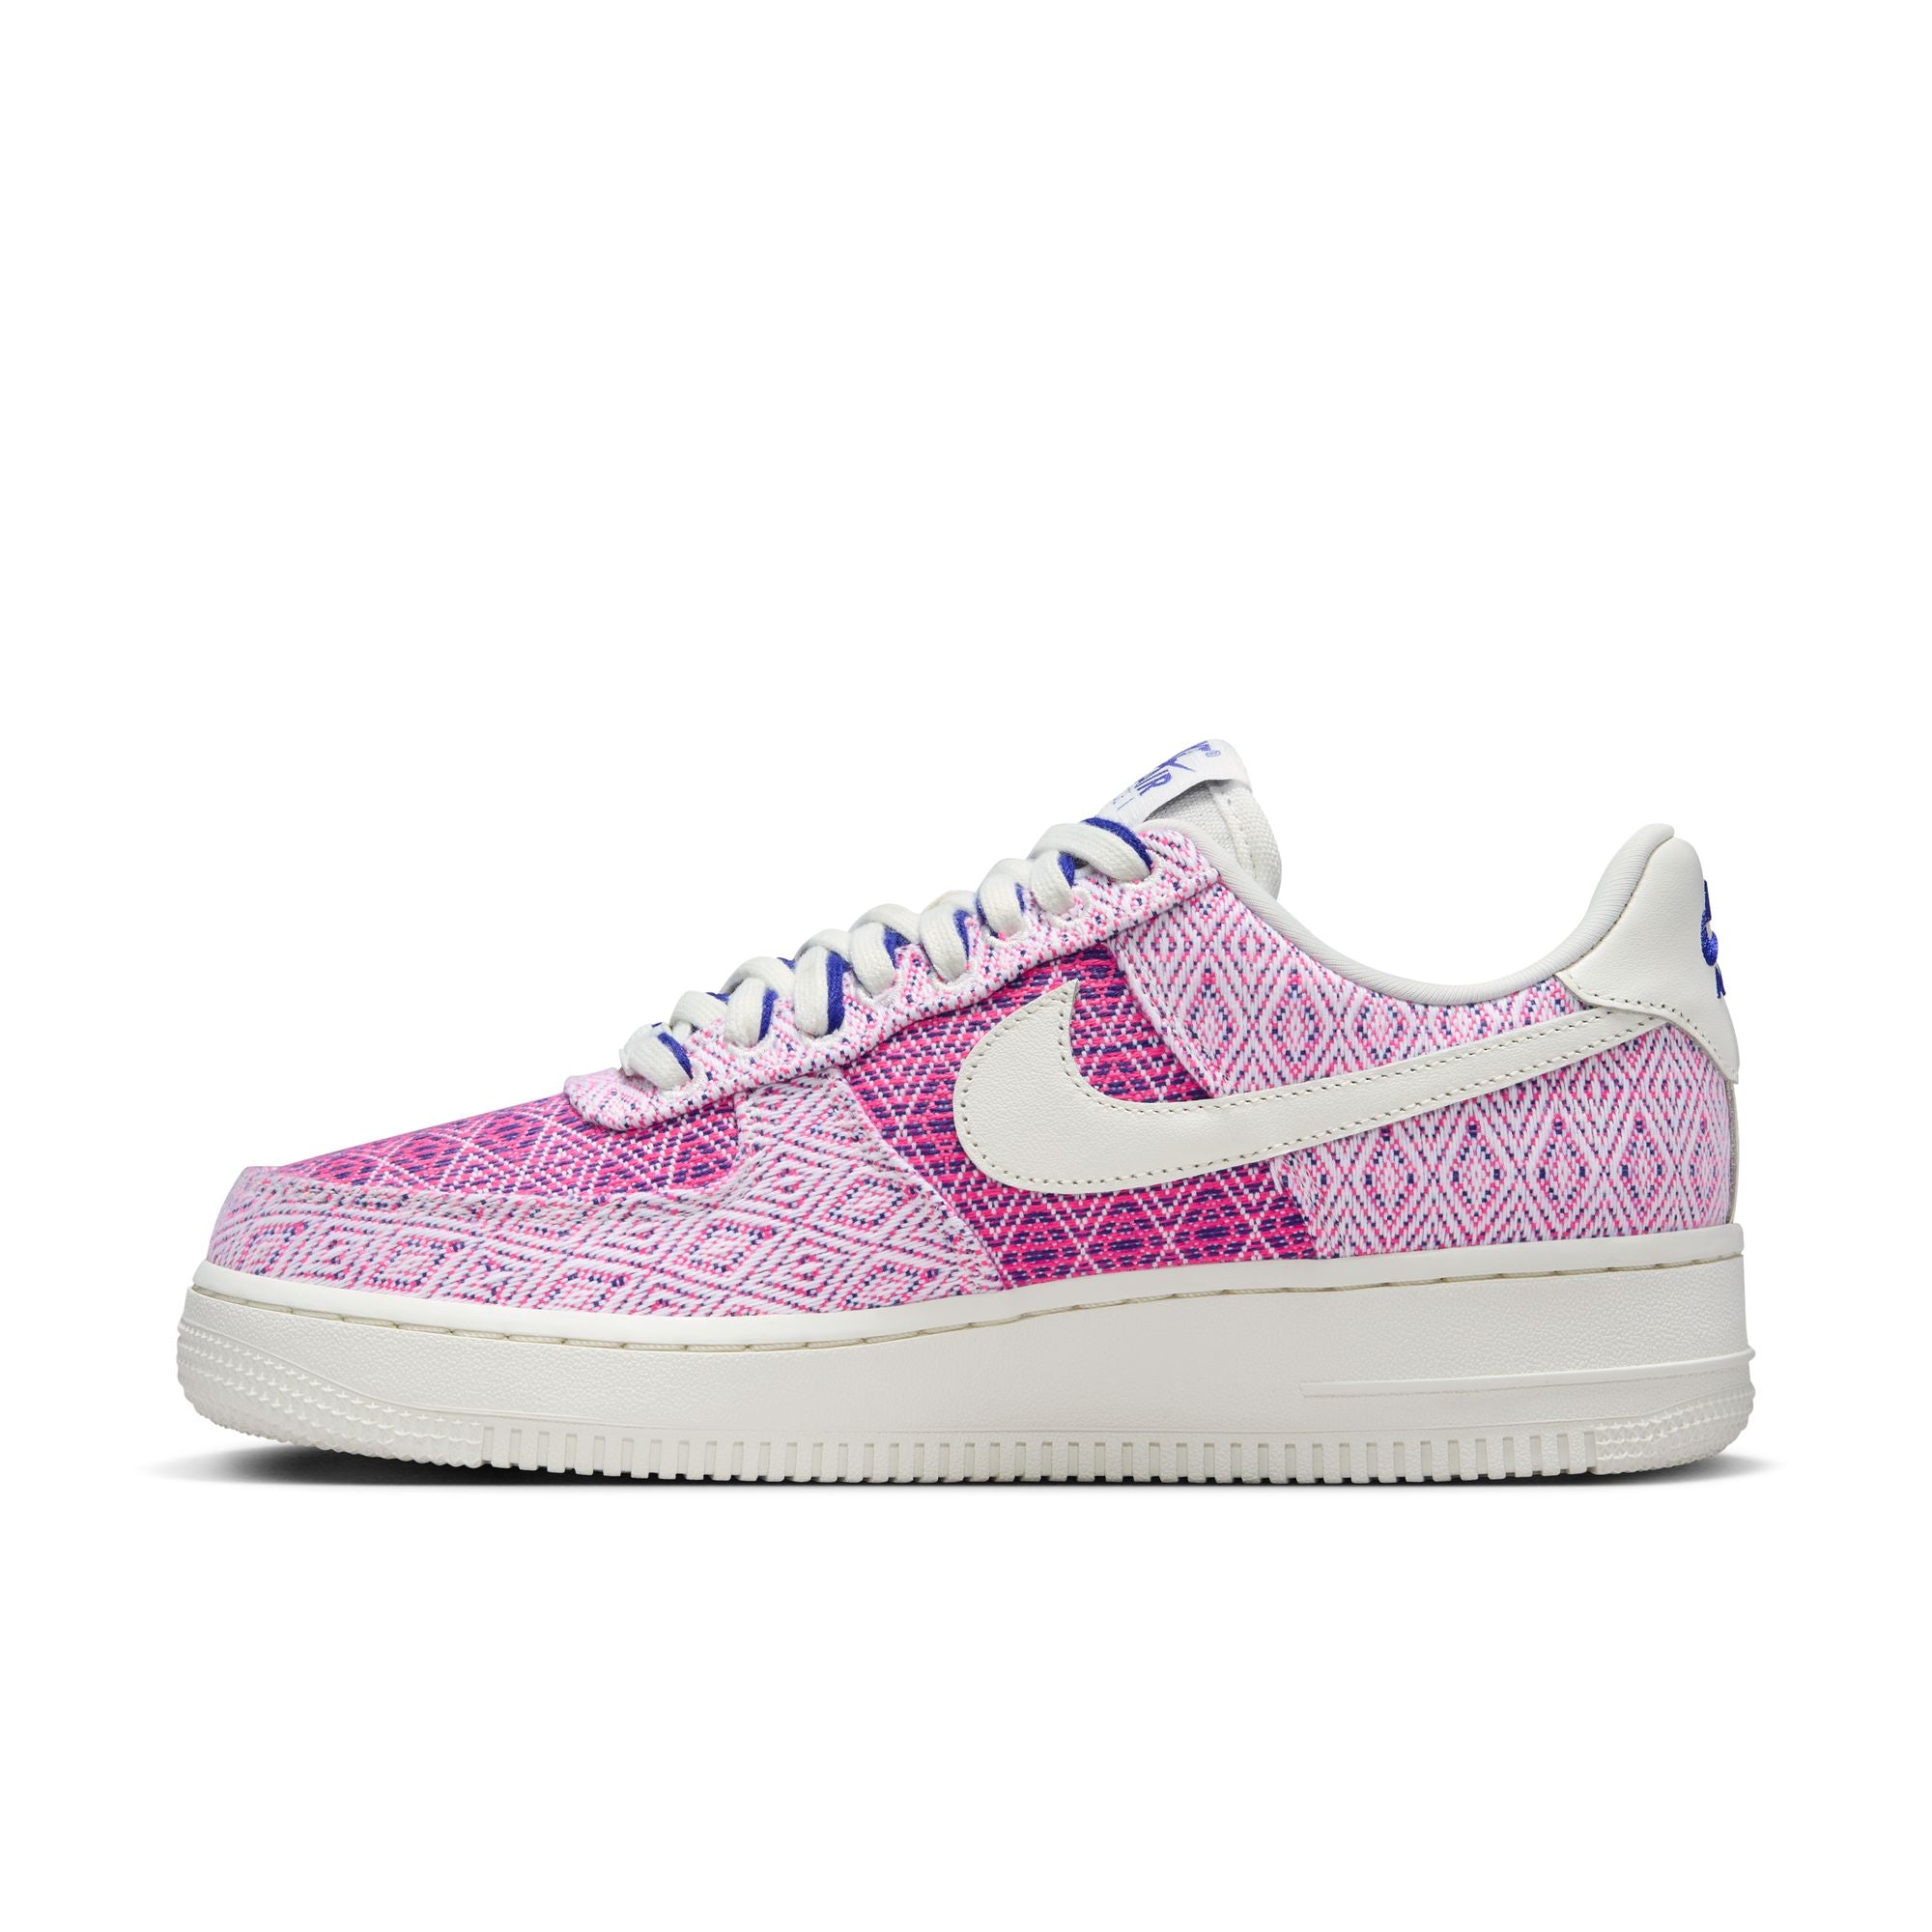 Women's Air Force 1 Low "Woven Together"